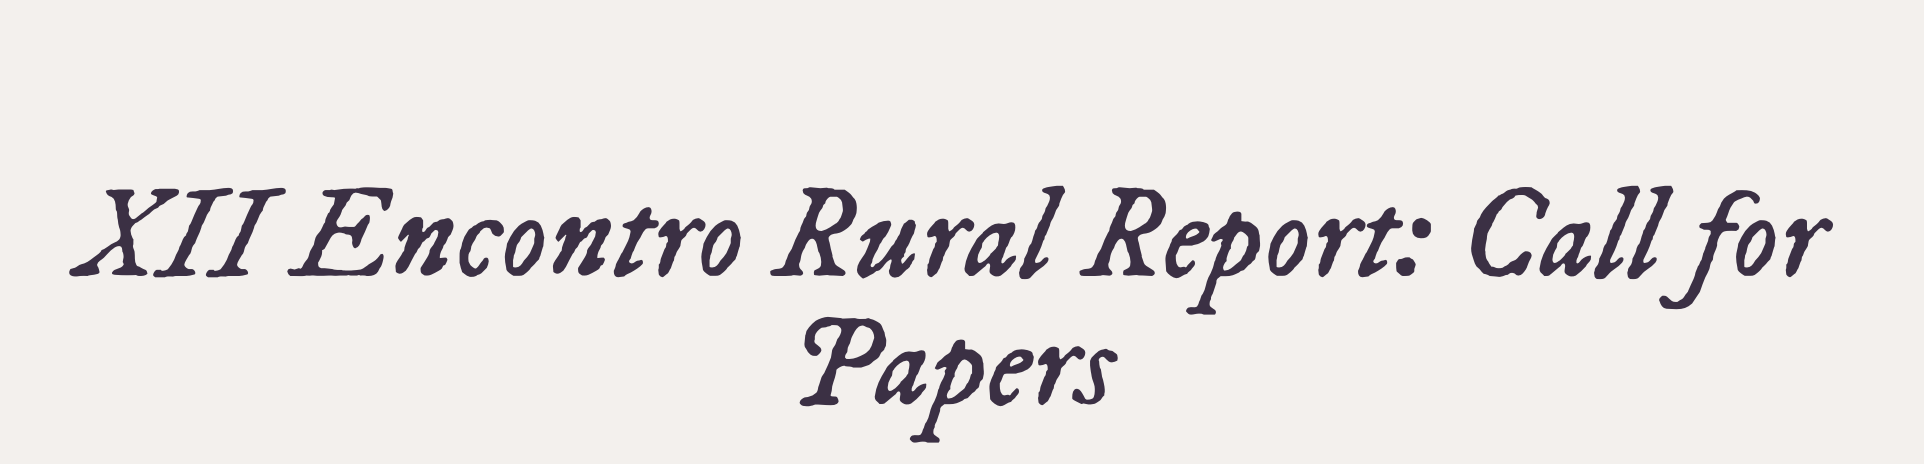 Call for papers: XII Rural Report Meeting